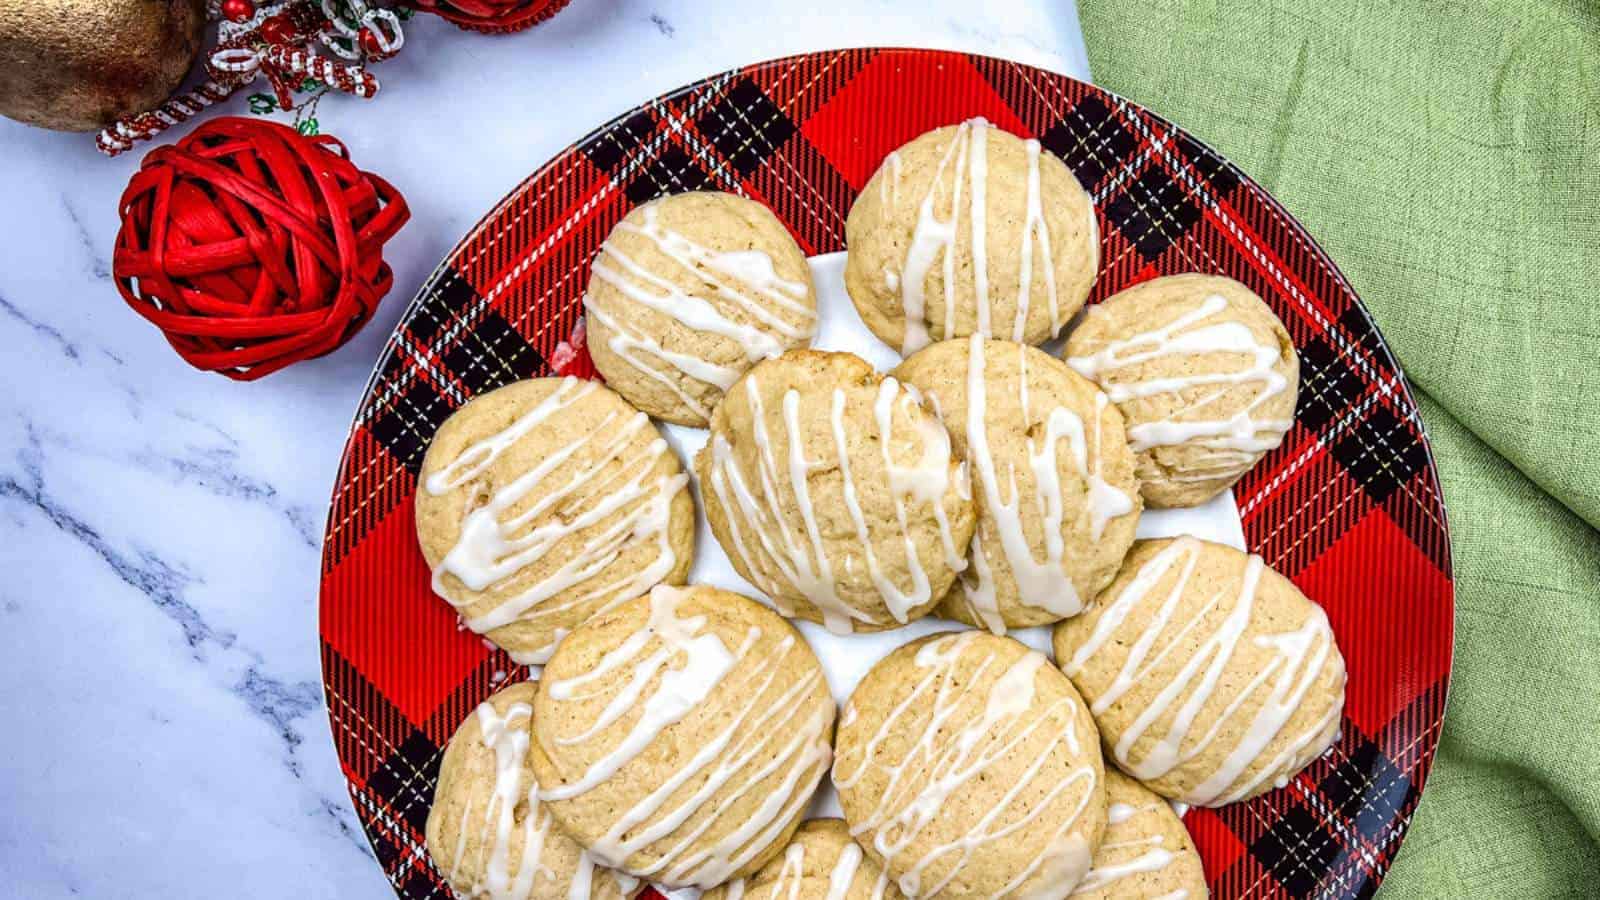 A plate of Eggnog Cookies with Spiced Rum Glaze.